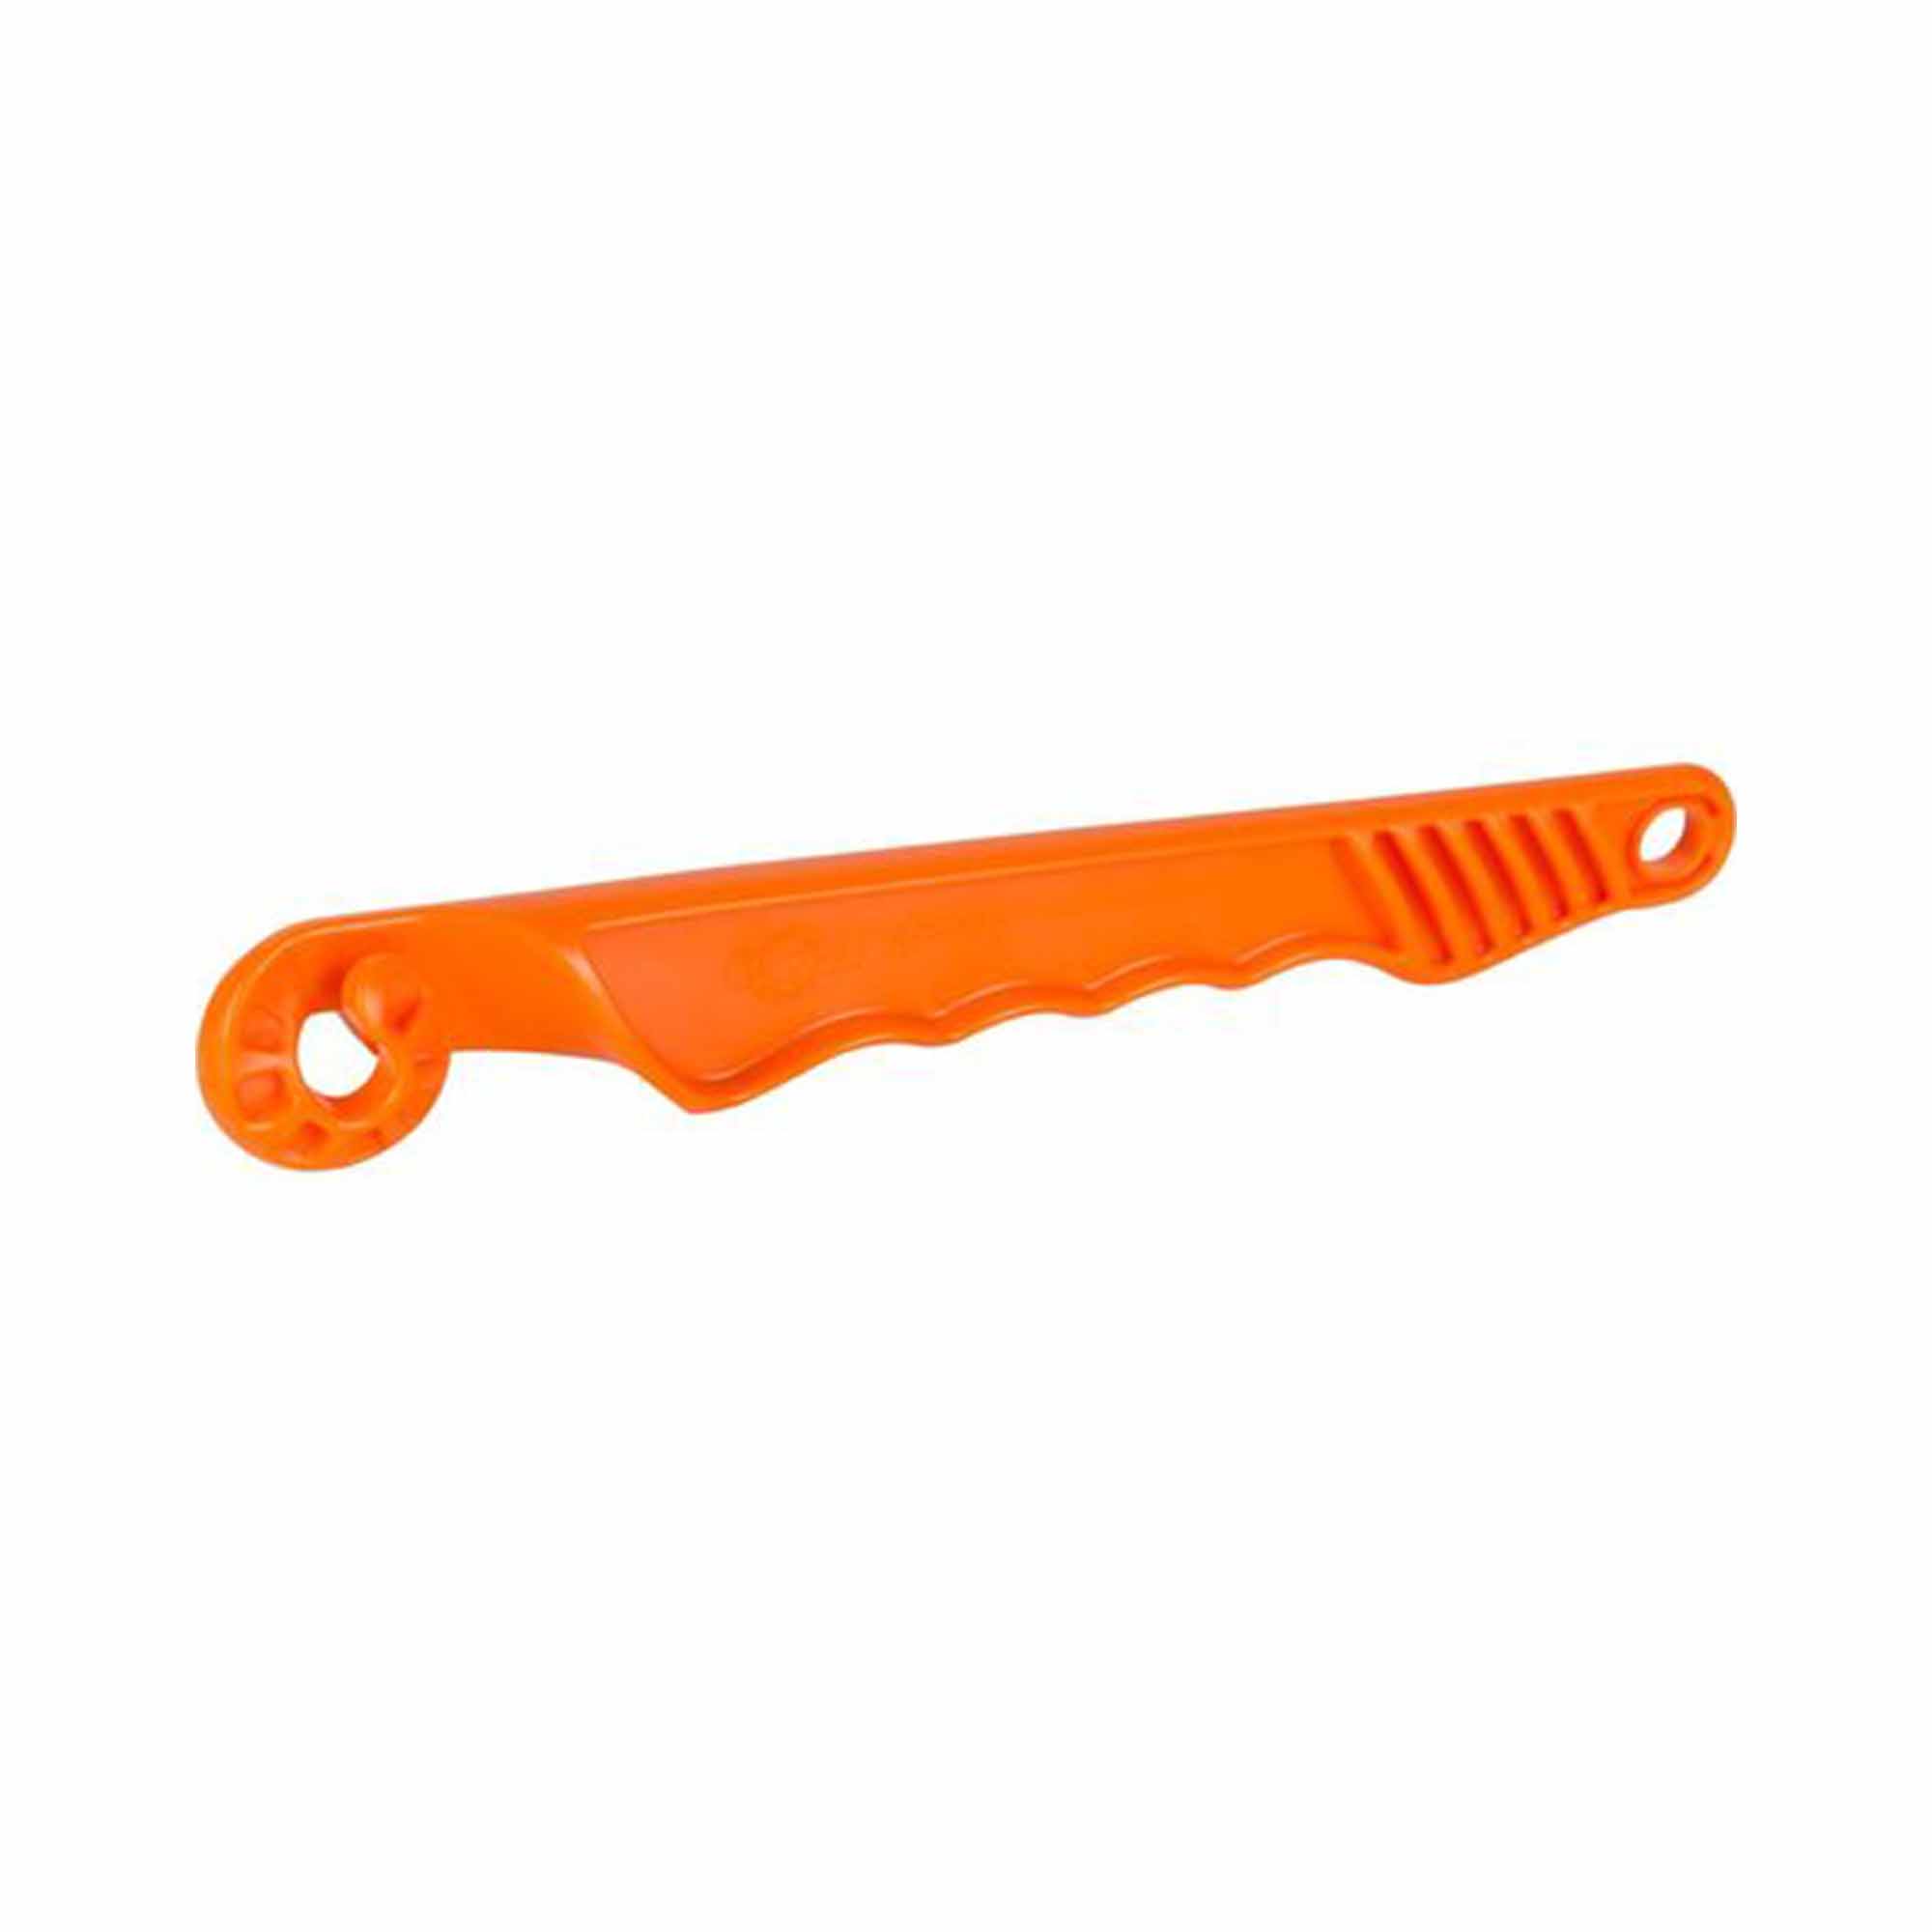 Insulated portable handle